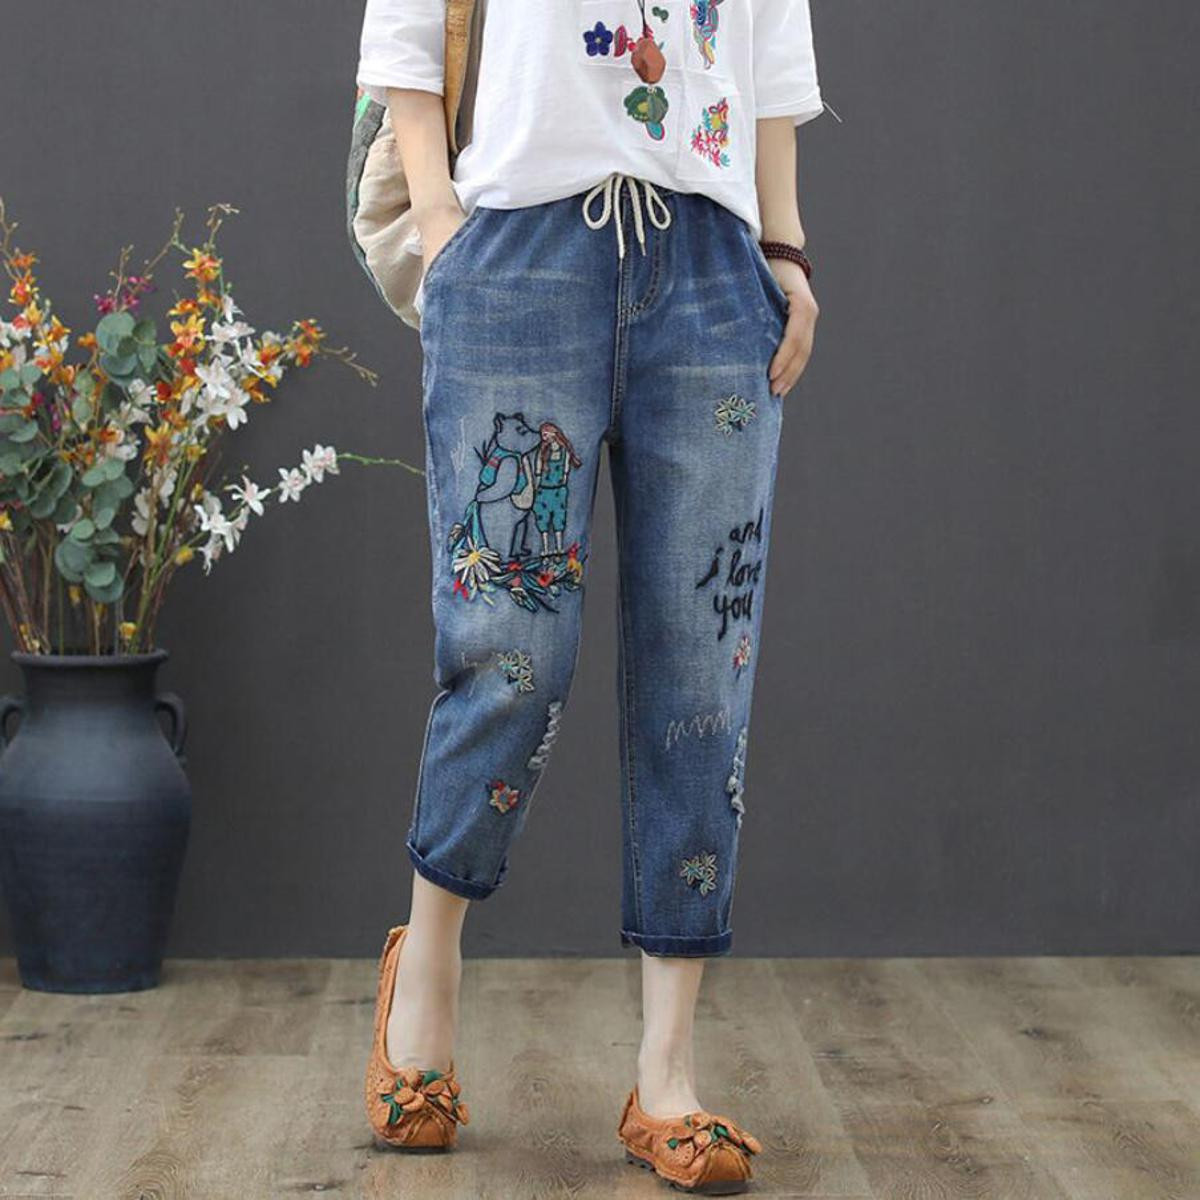 Women's Casual Harem pants Spring Summer Fashion Loose Ankle